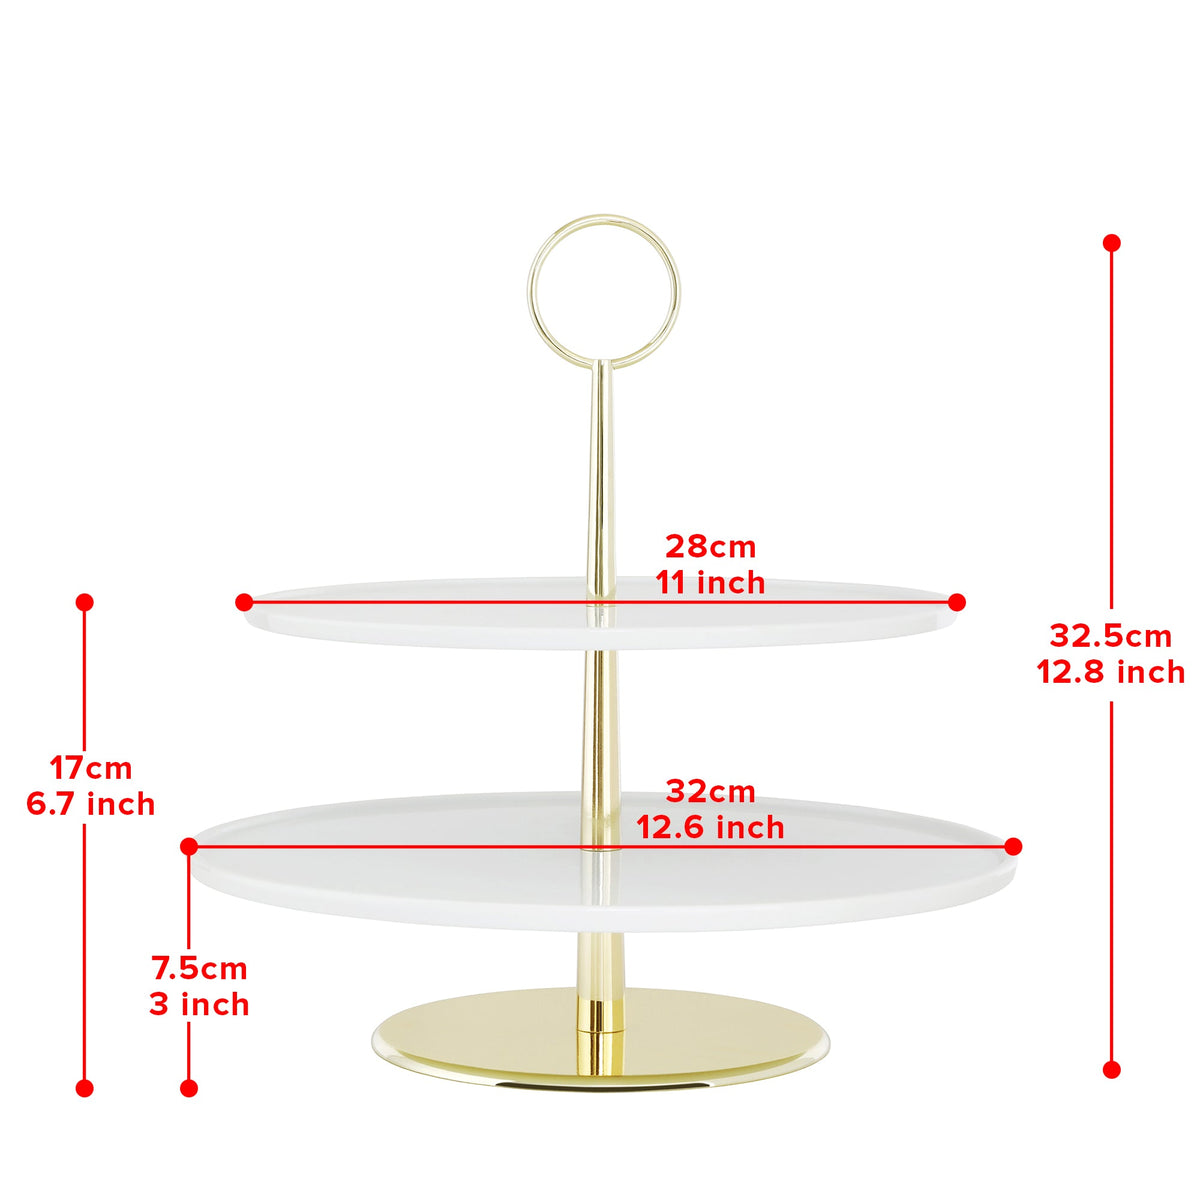 Casa Padrino luxury etagere black / gold 35 x 26 x H. 32.5 cm - Oval cake &  biscuit cake stand - Gastronomy accessories - Restaurant accessories -  Hotel accessories - Luxury accessories | Casa Padrino